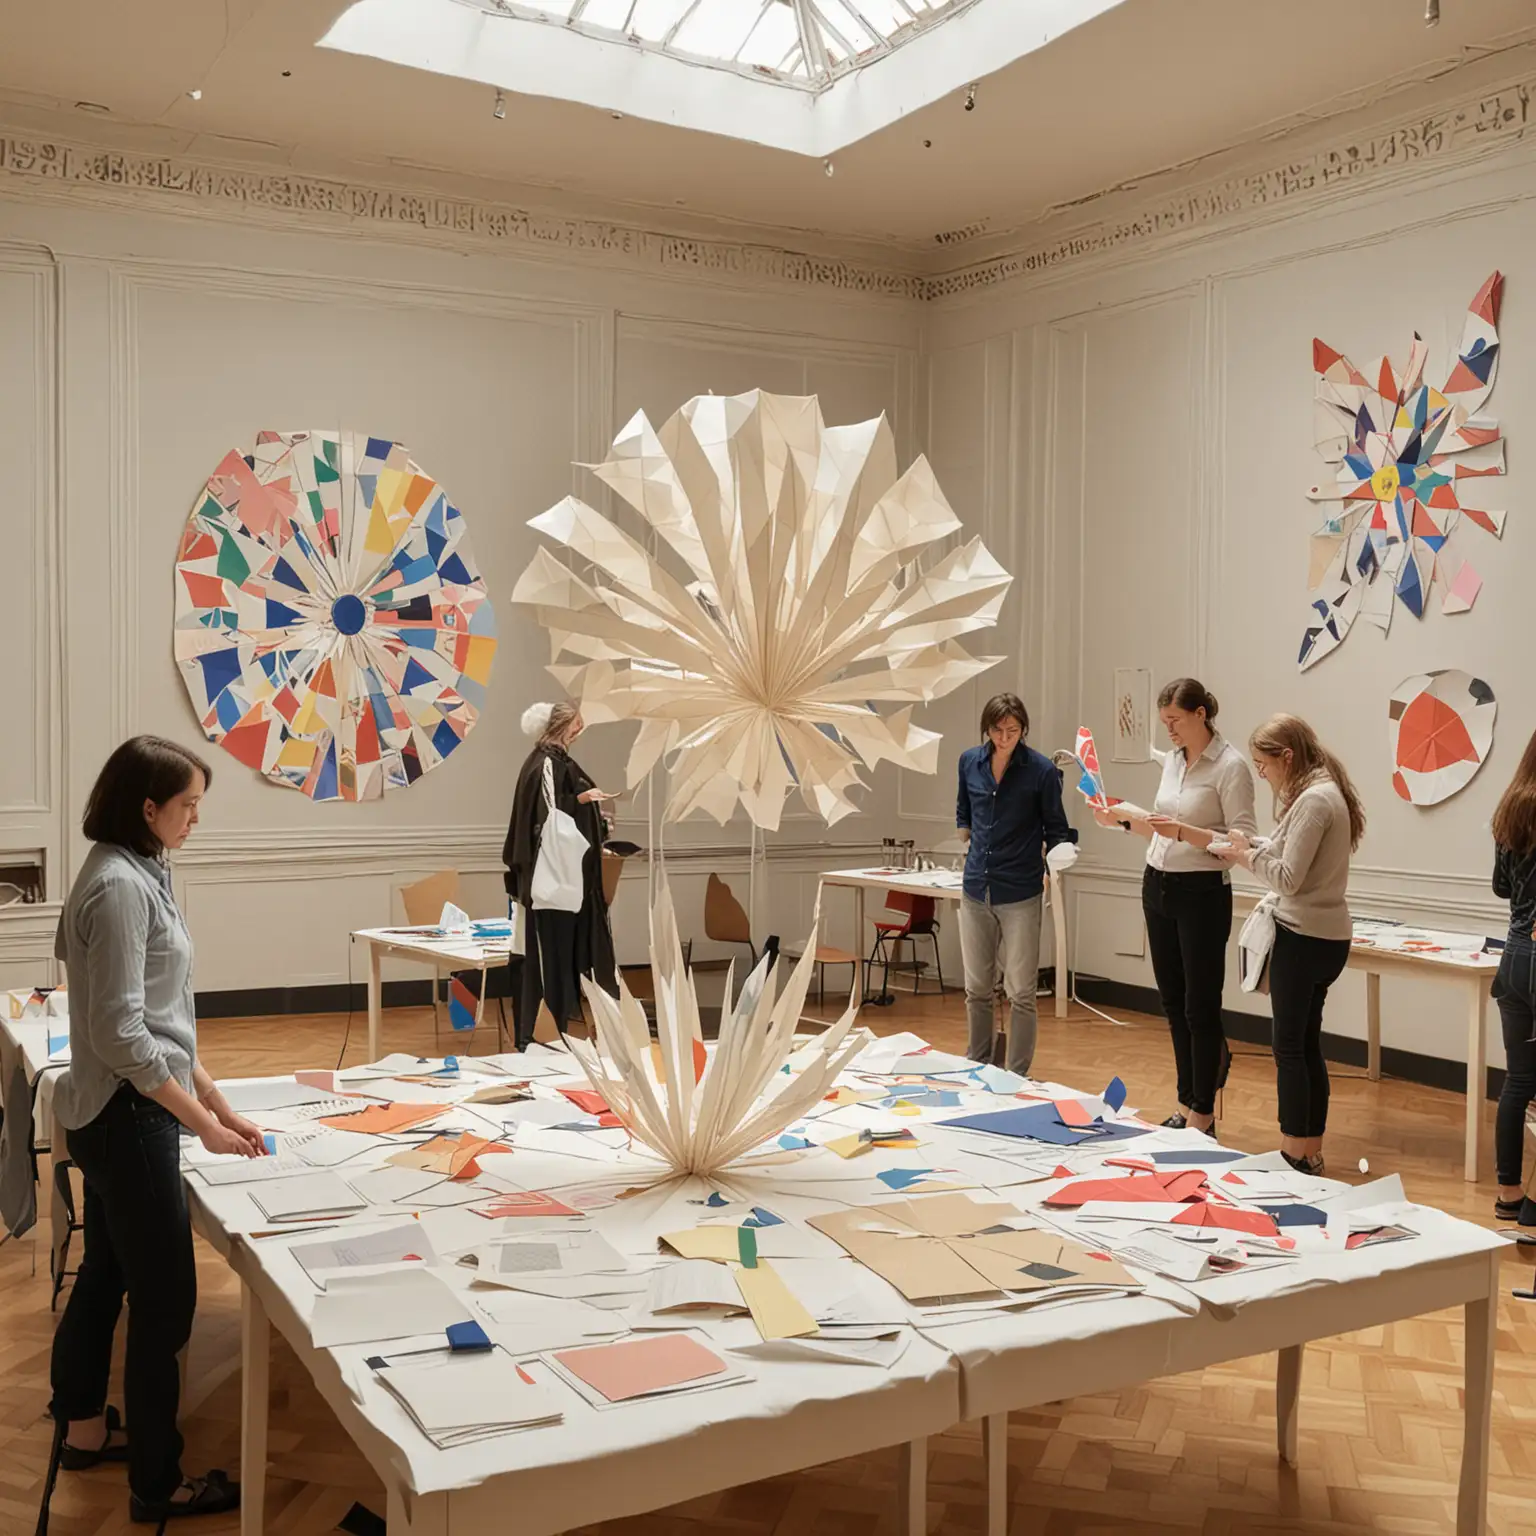 AIcreating art for exhibition inspired by himla af klint and kandinsky, with big paper origami sculpture in middle of room. People working with the paper origami sculpture exhibition, curator and designer, in middle of room.